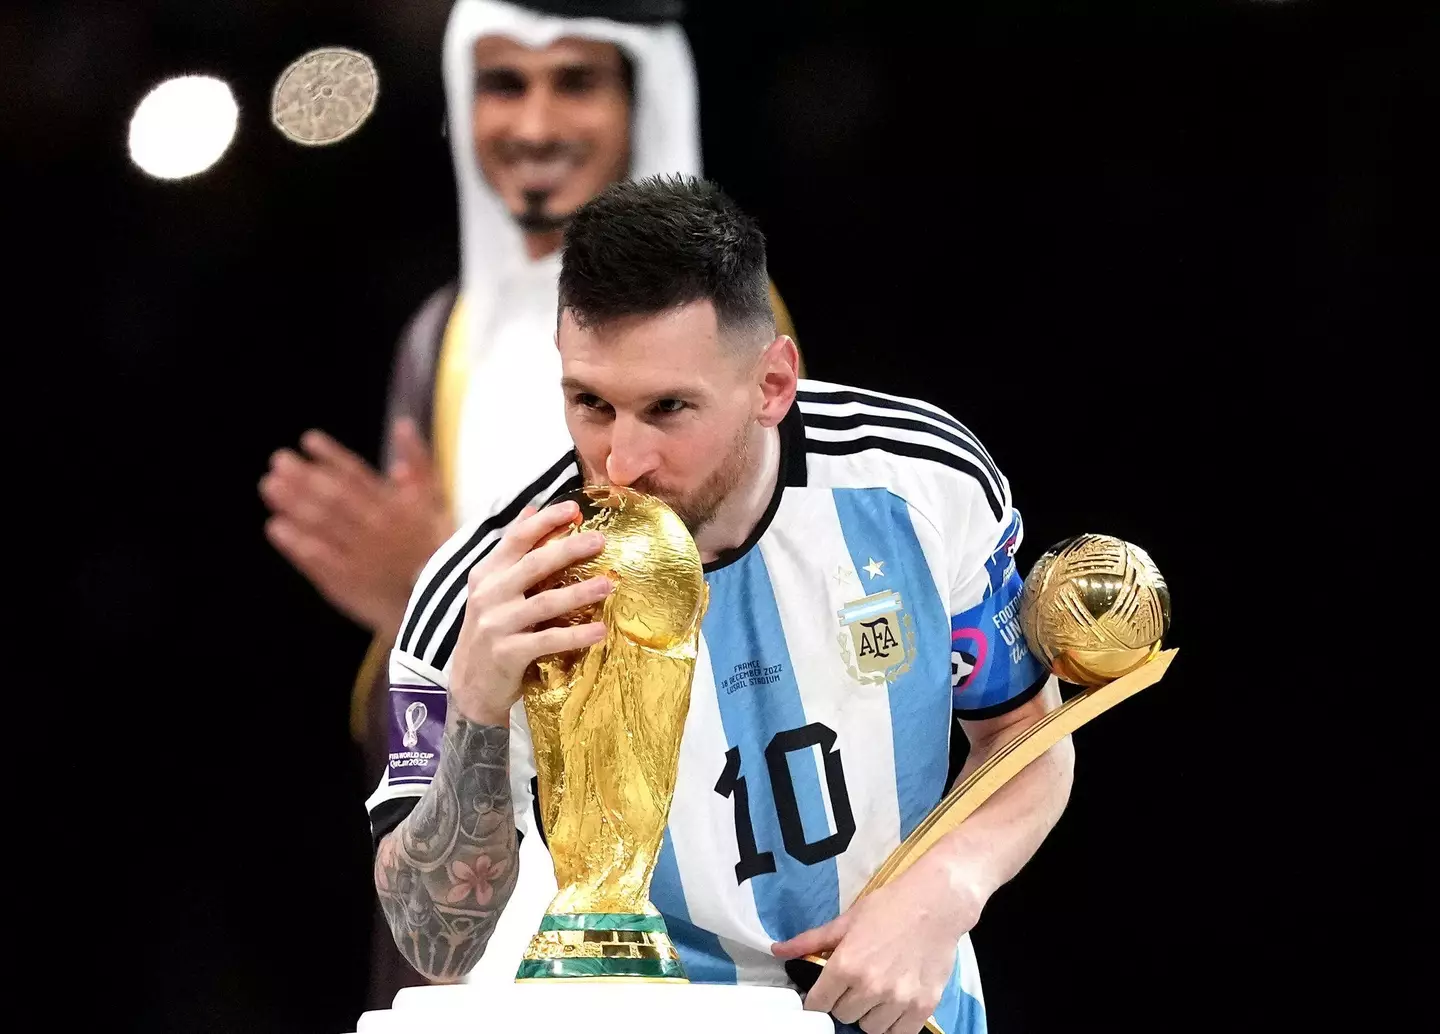 Argentina's Lionel Messi kisses the FIFA World Cup Trophy while holding the trophy for the Golden Ball after the penalty shoot-out following extra time in the FIFA World Cup final at Lusail Stadium, Qatar.